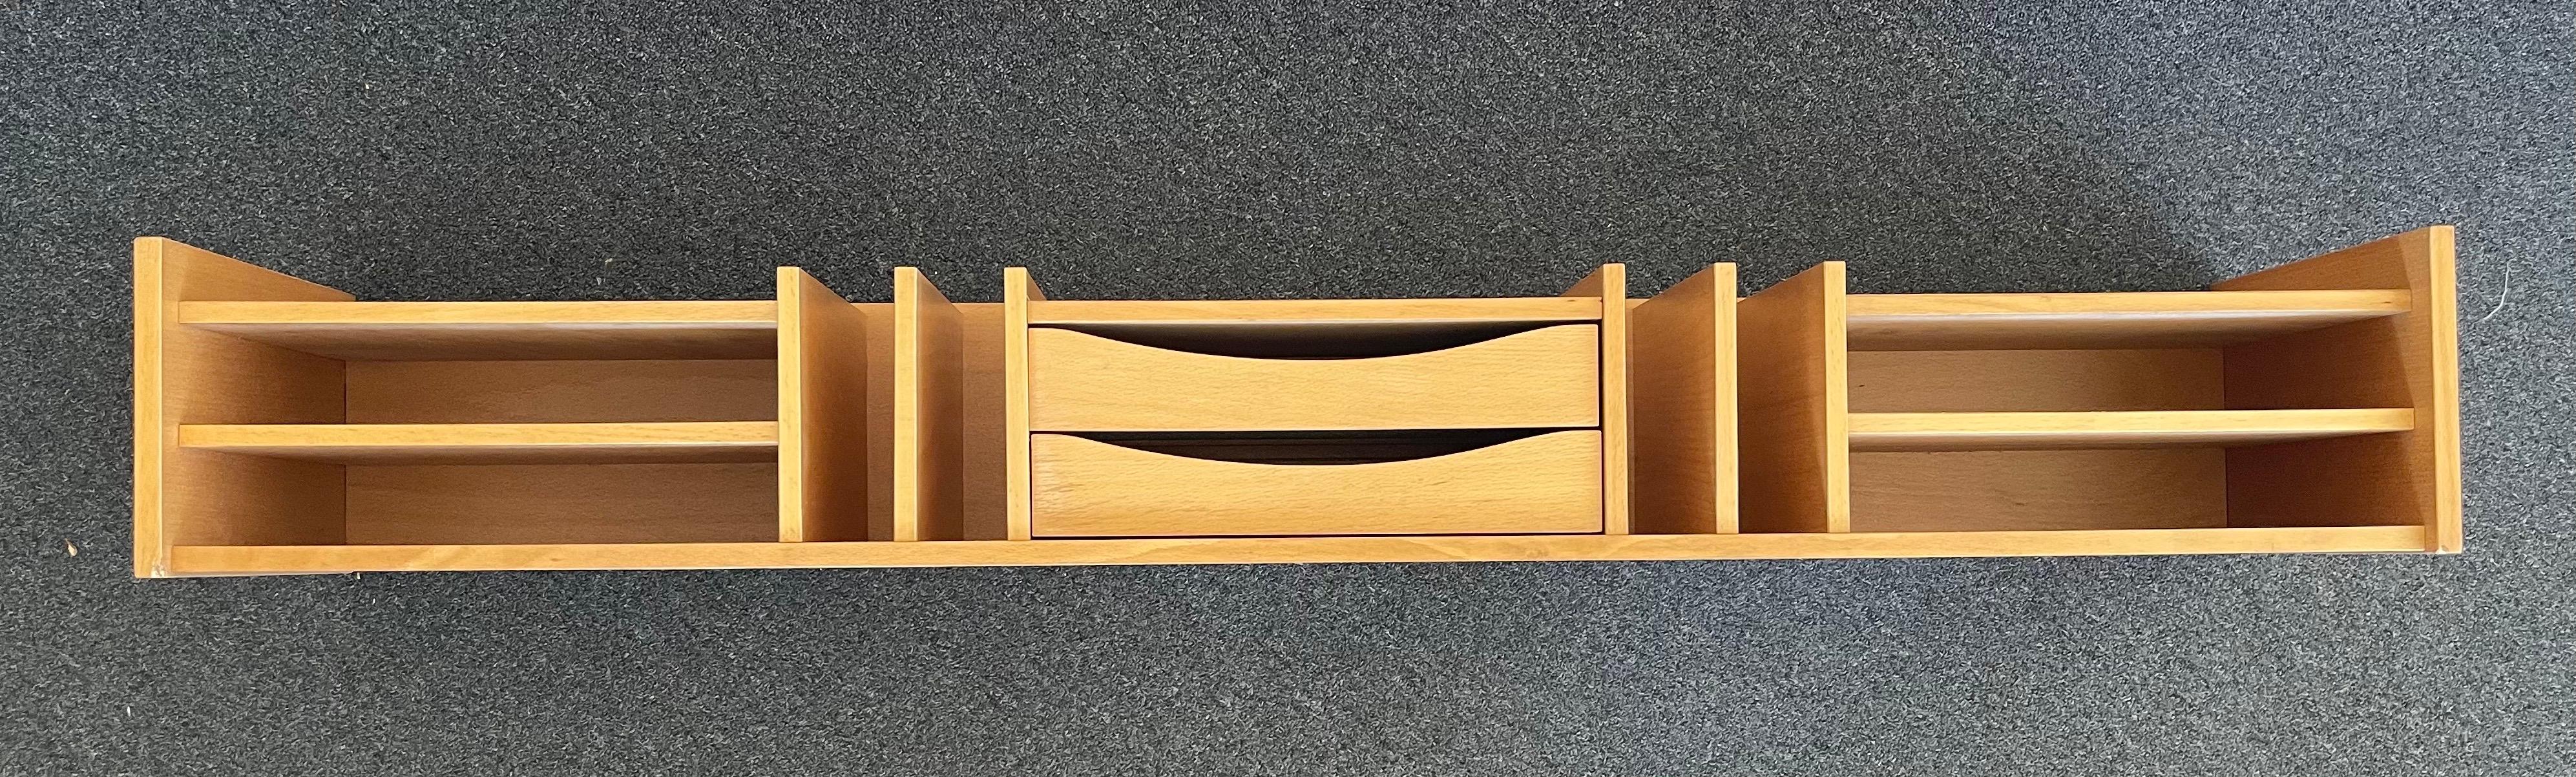 Very functional extra large Danish modern teak desk organizer or letter tray by Pedersen & Hansen, circa 1970s. There are seven horizontal letter trays, four vertical slots and two drawers. The piece has a very light colored finish and is in good